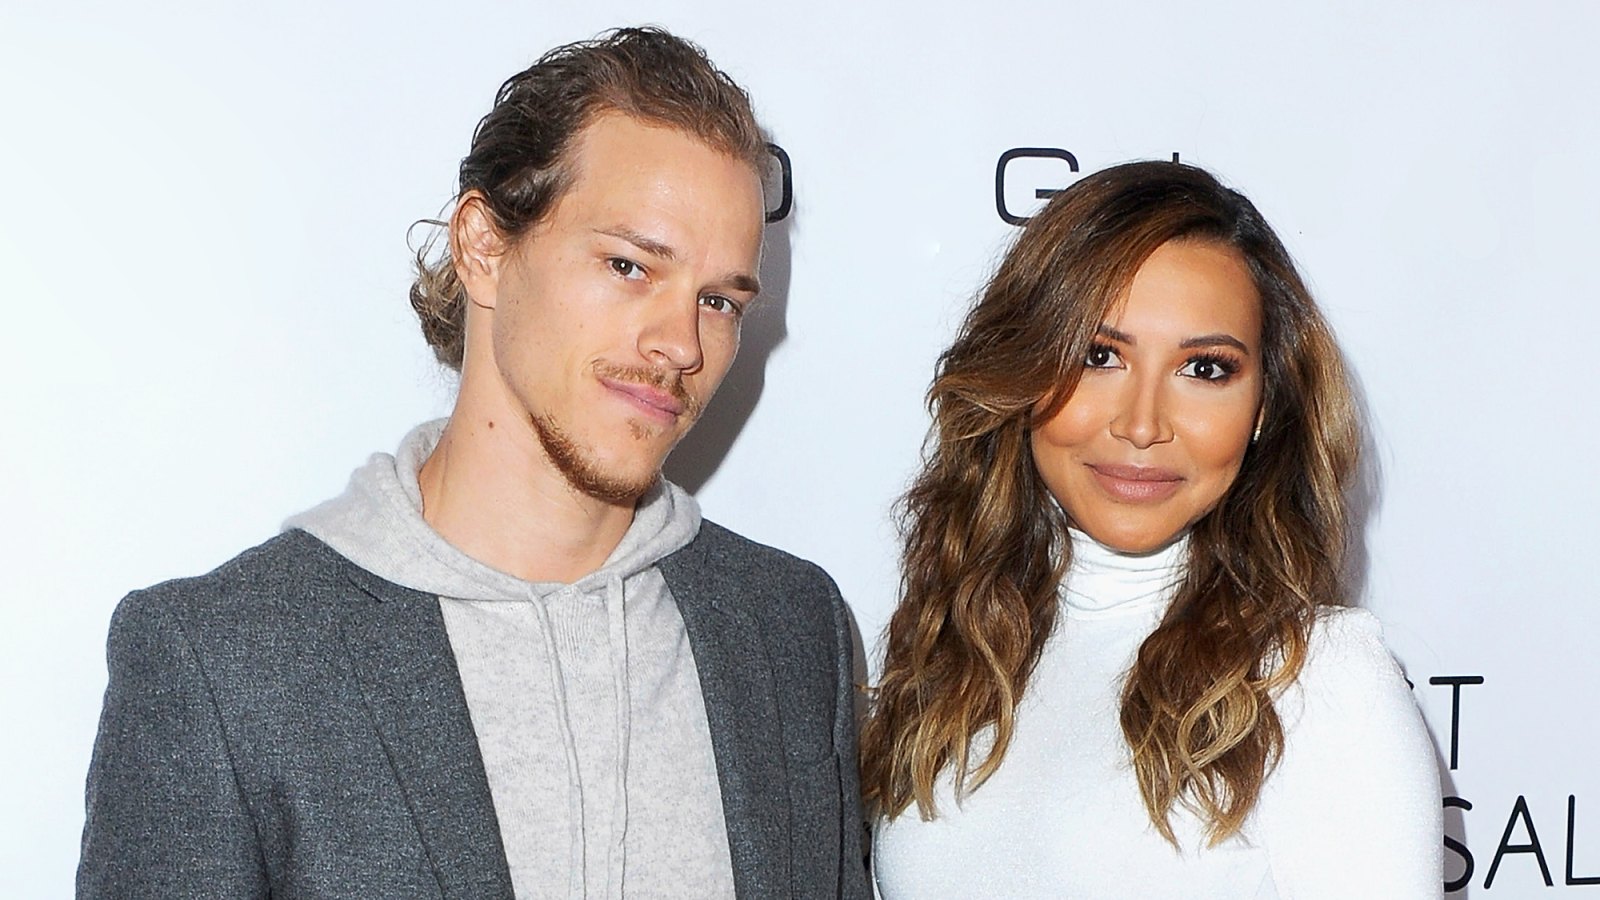 Ryan Dorsey and Naya Rivera arrive at the 2015 March Of Dimes Celebration Of Babies at the Beverly Wilshire Four Seasons Hotel in Beverly Hills, California.